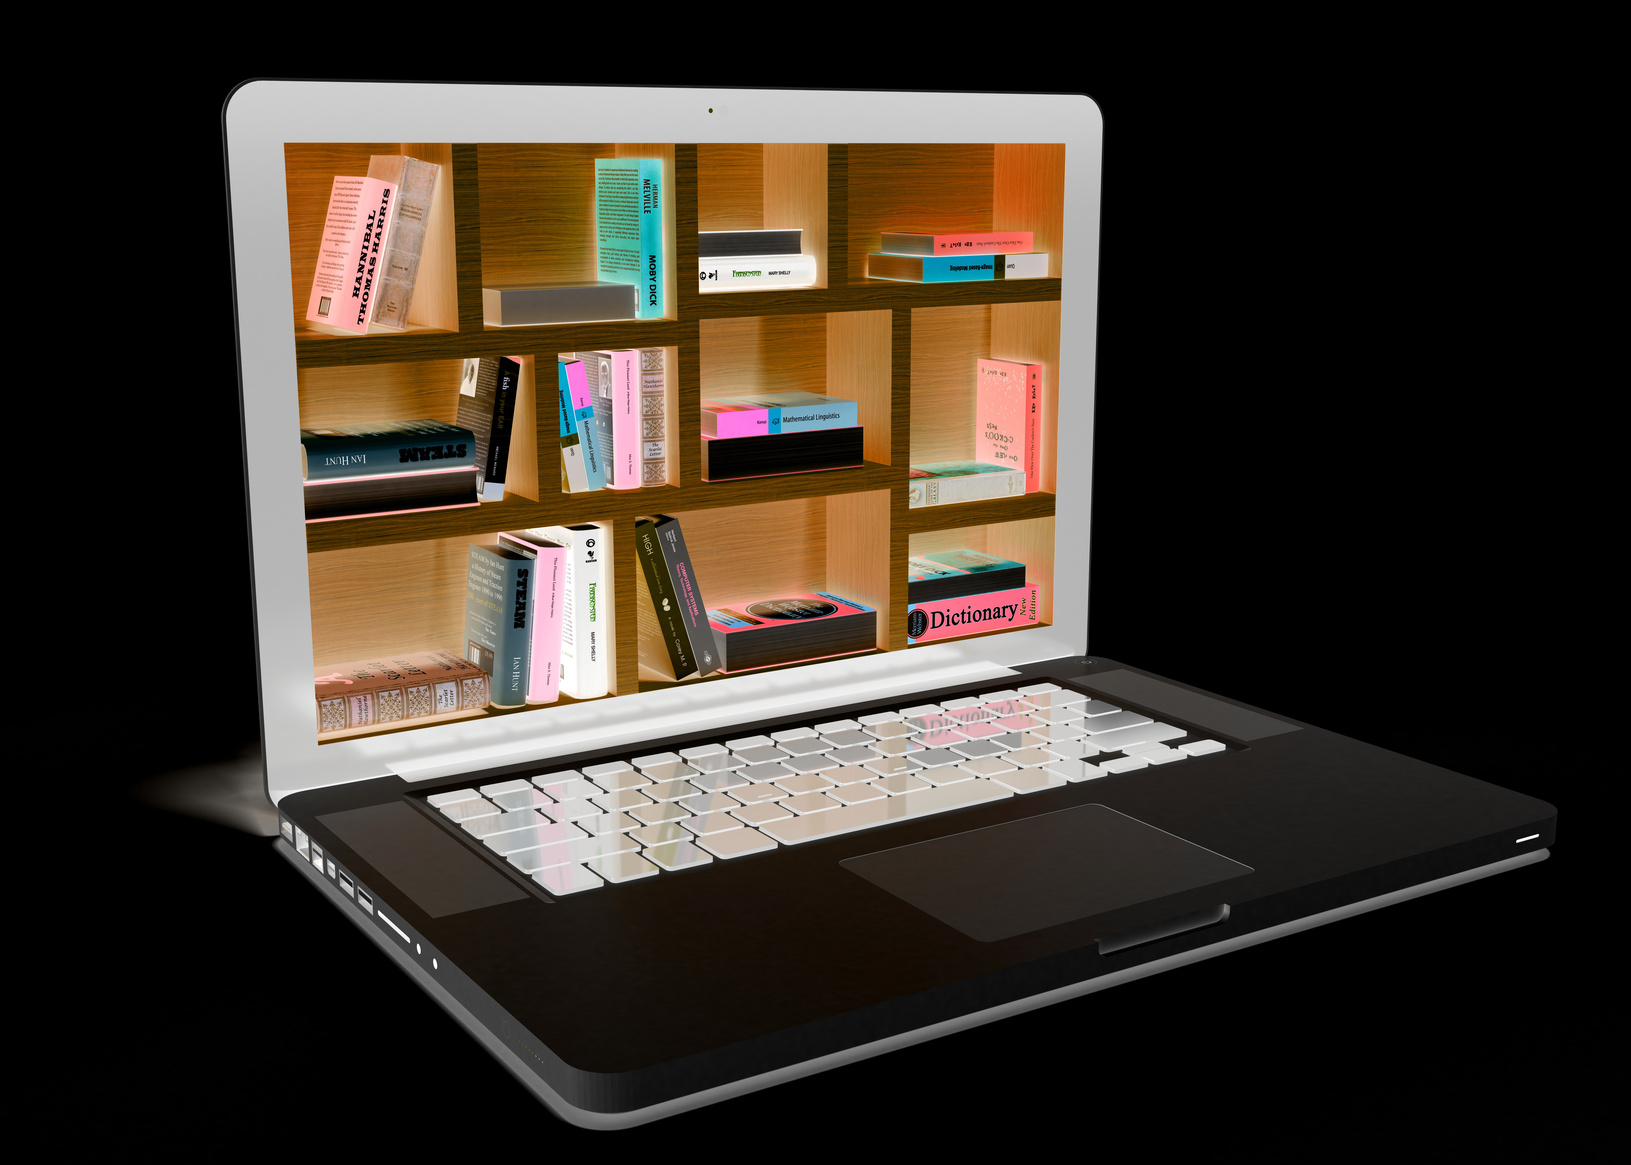 E-learning education - internet library, digital library - books inside computer